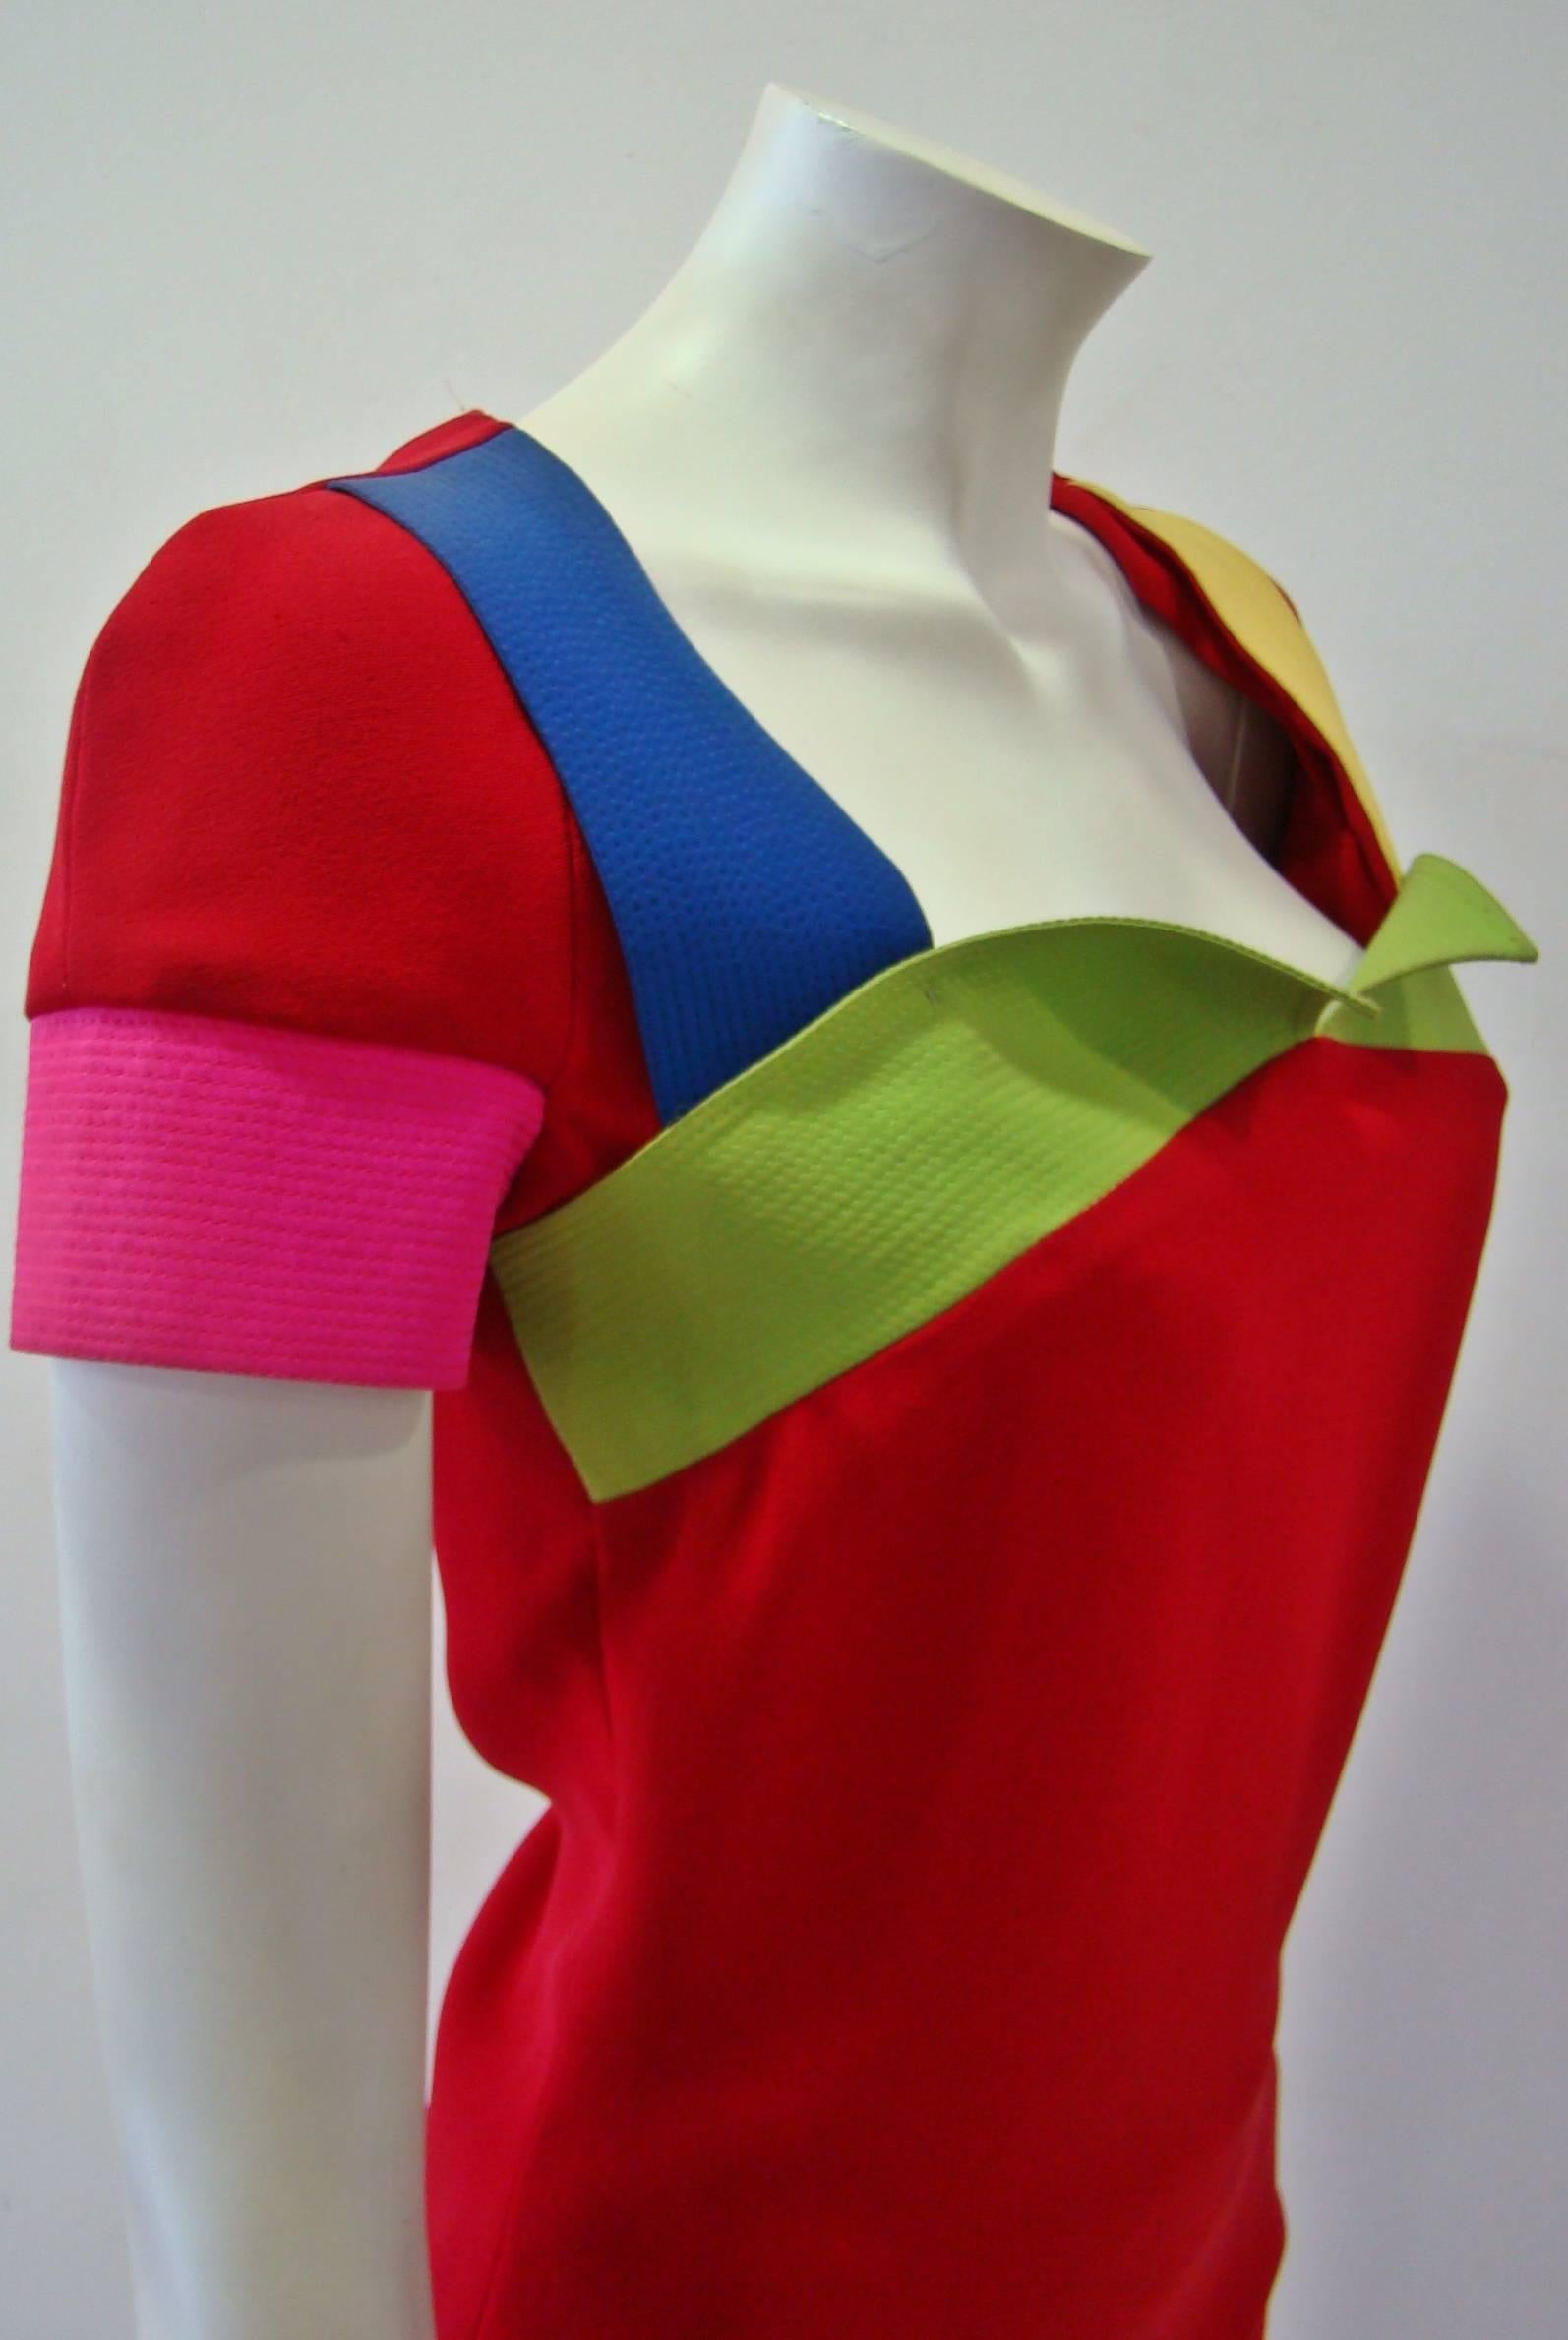 Rare Gianni Versace Couture Silk Tunic Color-Block Top Spring 1991 For Sale 2